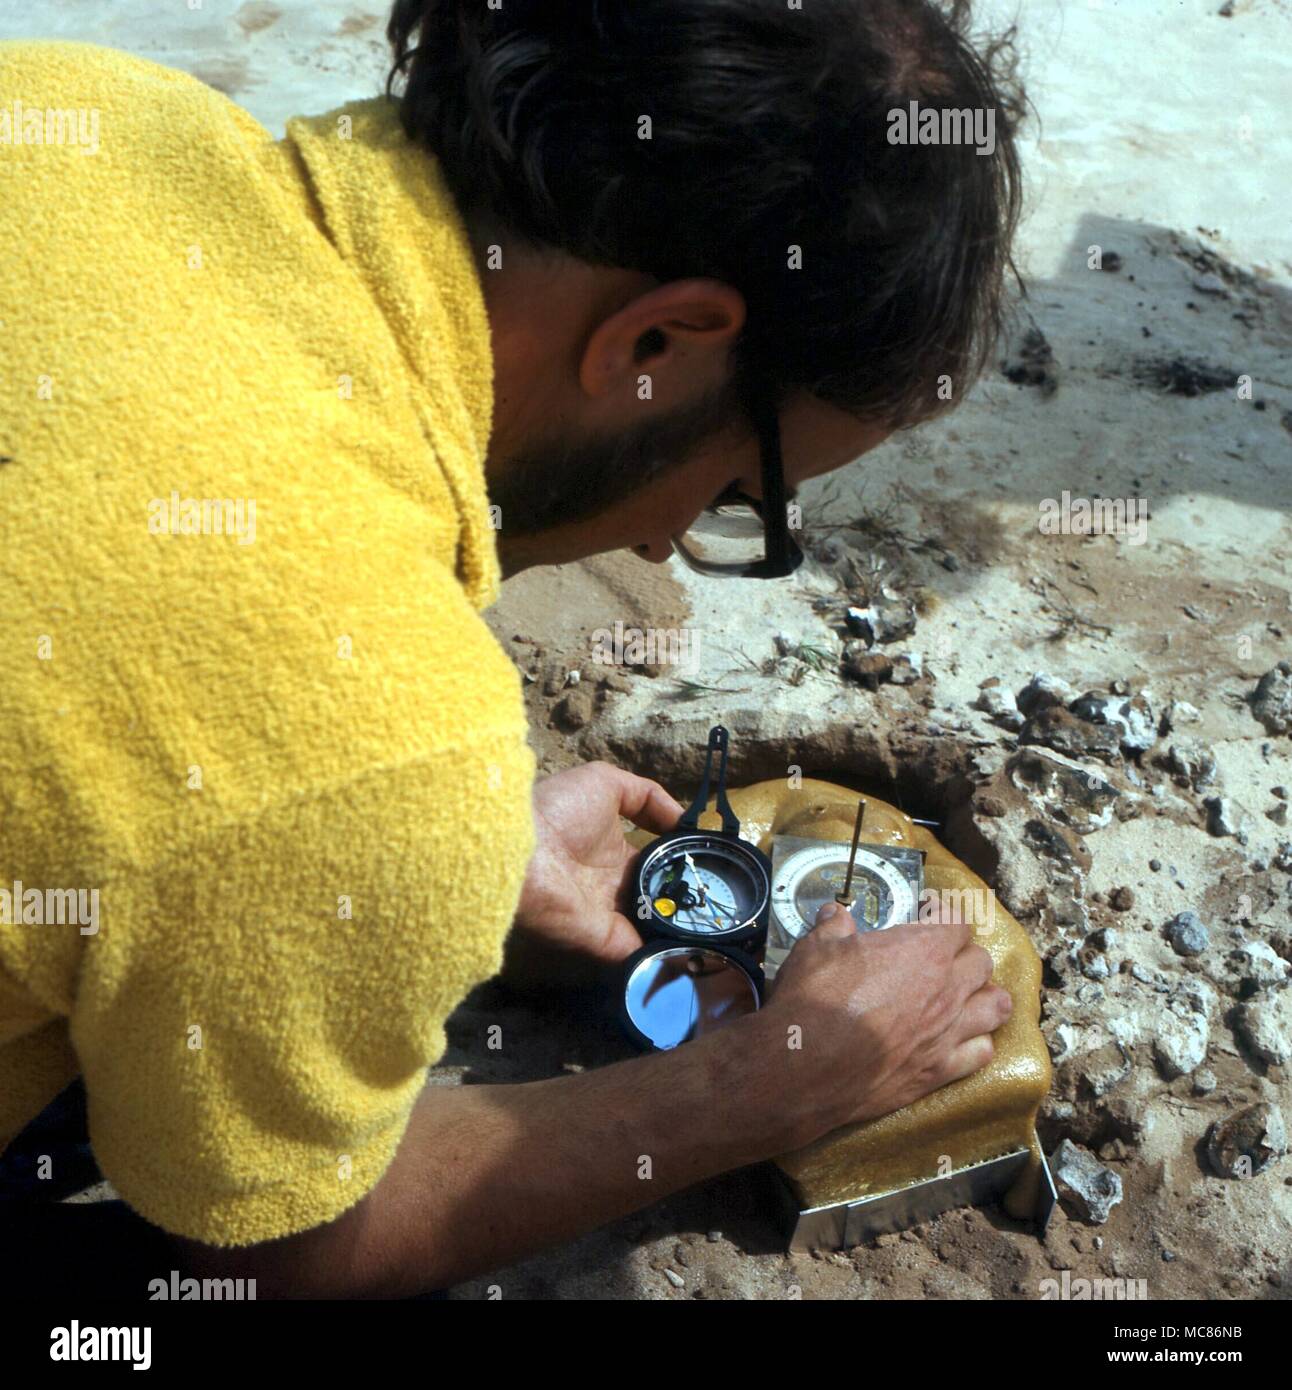 SCIENTIFIC CURIOSITIES Experiments in magnetic reversal, ont he site of the so-called 'Great Wal', at Lake Mungo, Australia. Mike Barbetti's sun compass in position Stock Photo